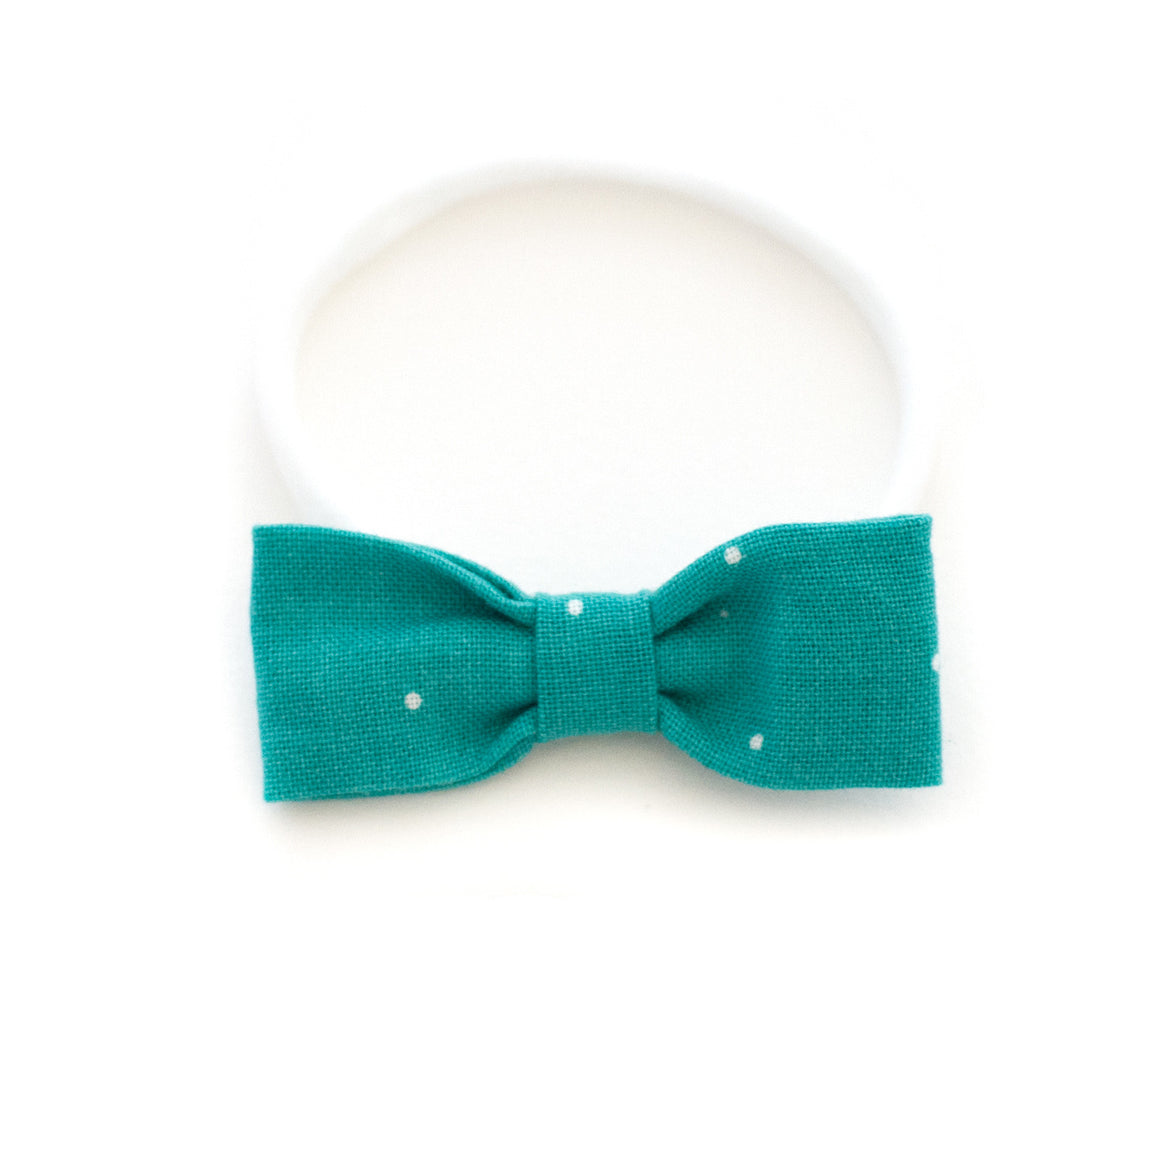 Teal Dot Baby Headband | Small Delicate Small Bow